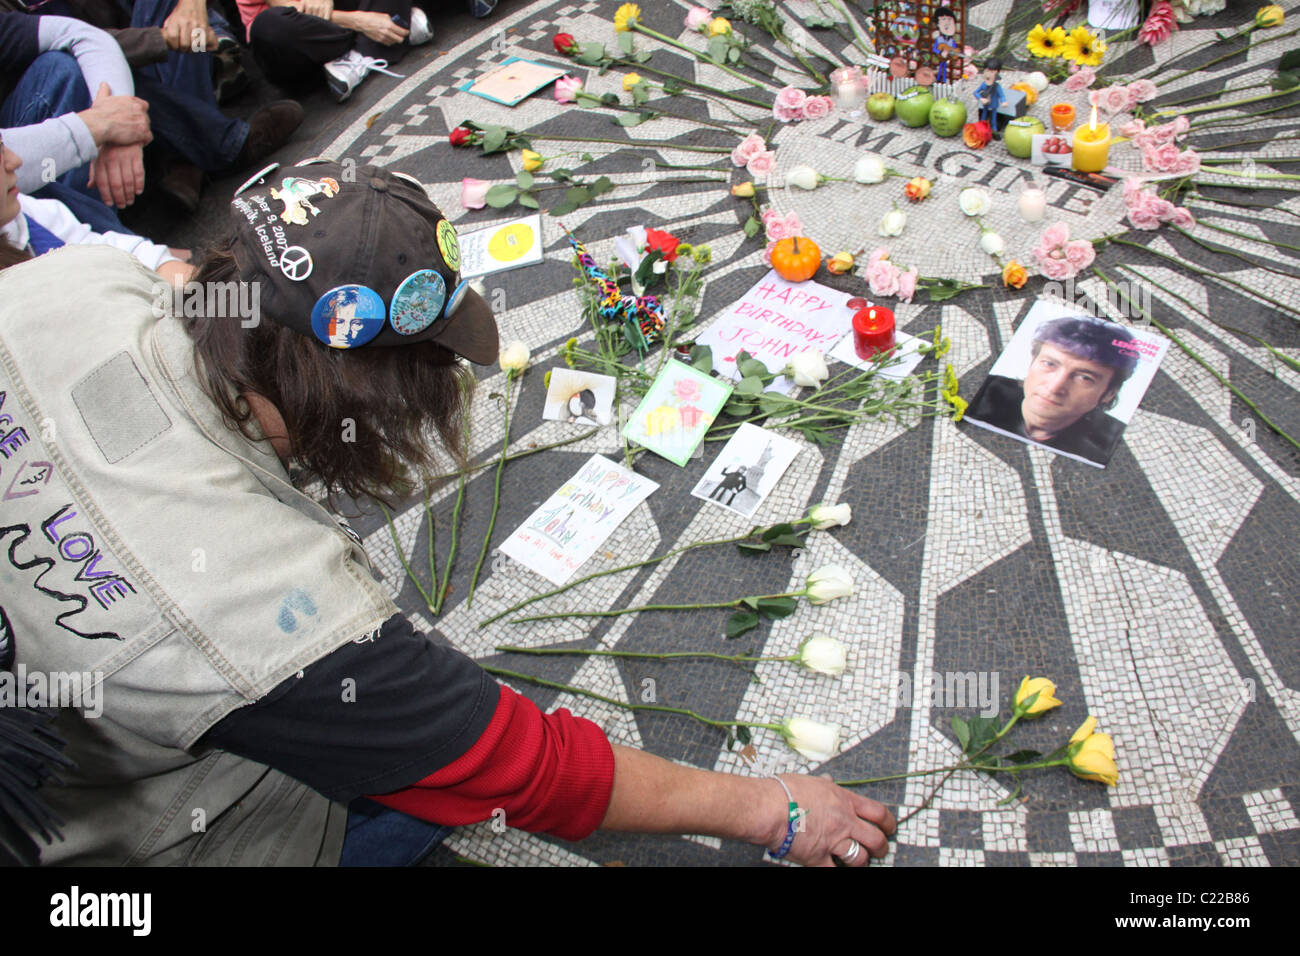 Fans pay tribute to the late John Lennon on what would have been the Beatle's 69th birthday. The gathering took place at the Stock Photo